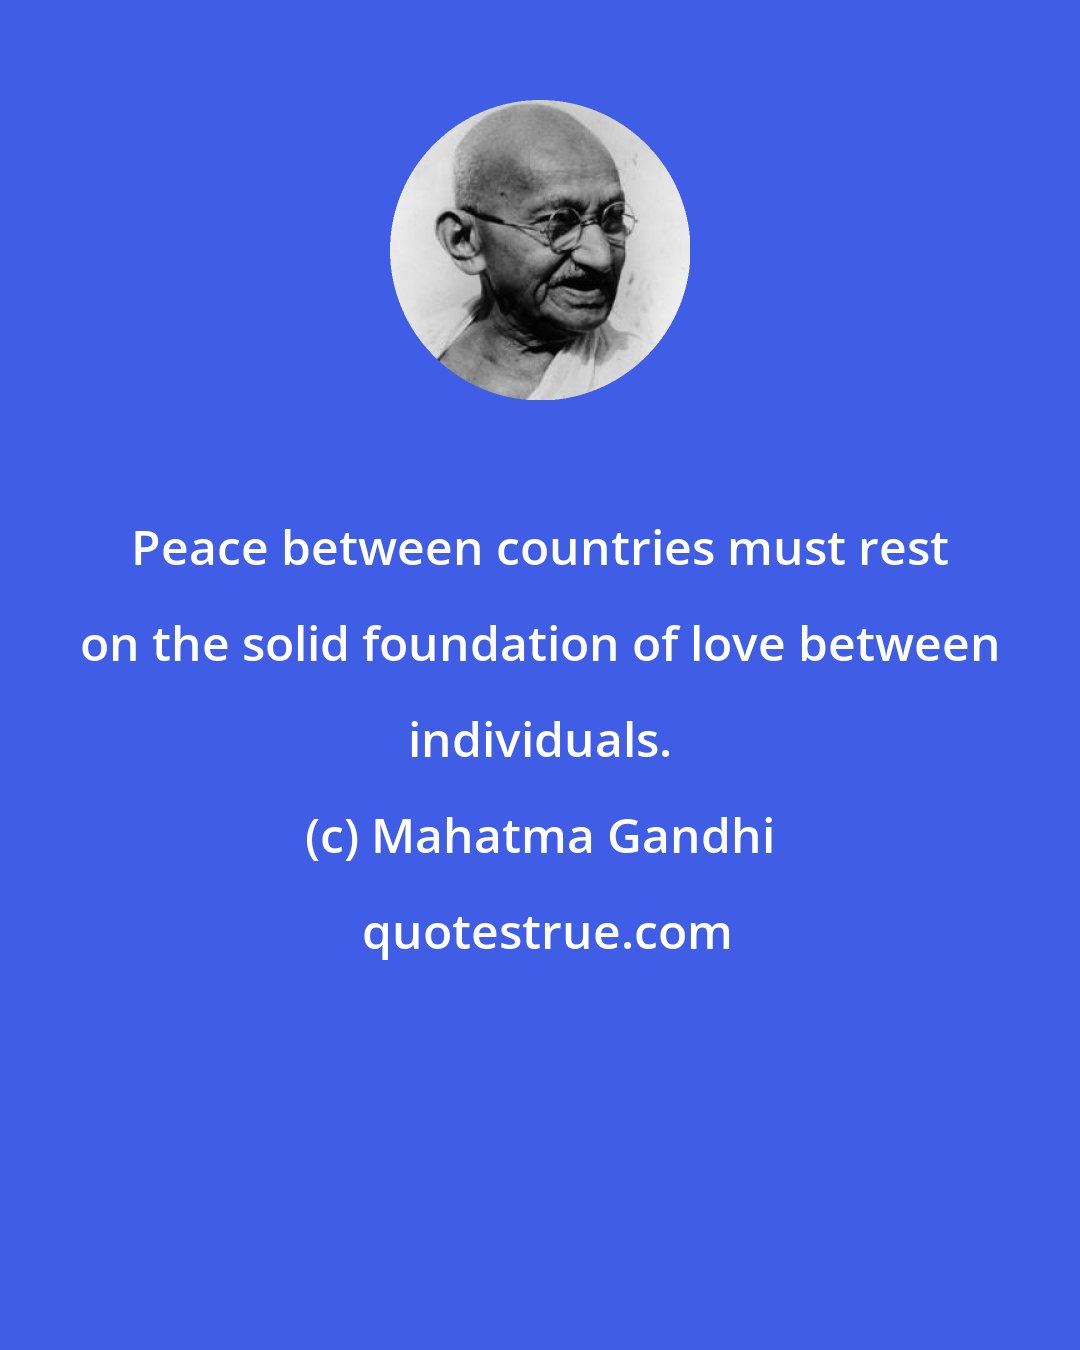 Mahatma Gandhi: Peace between countries must rest on the solid foundation of love between individuals.